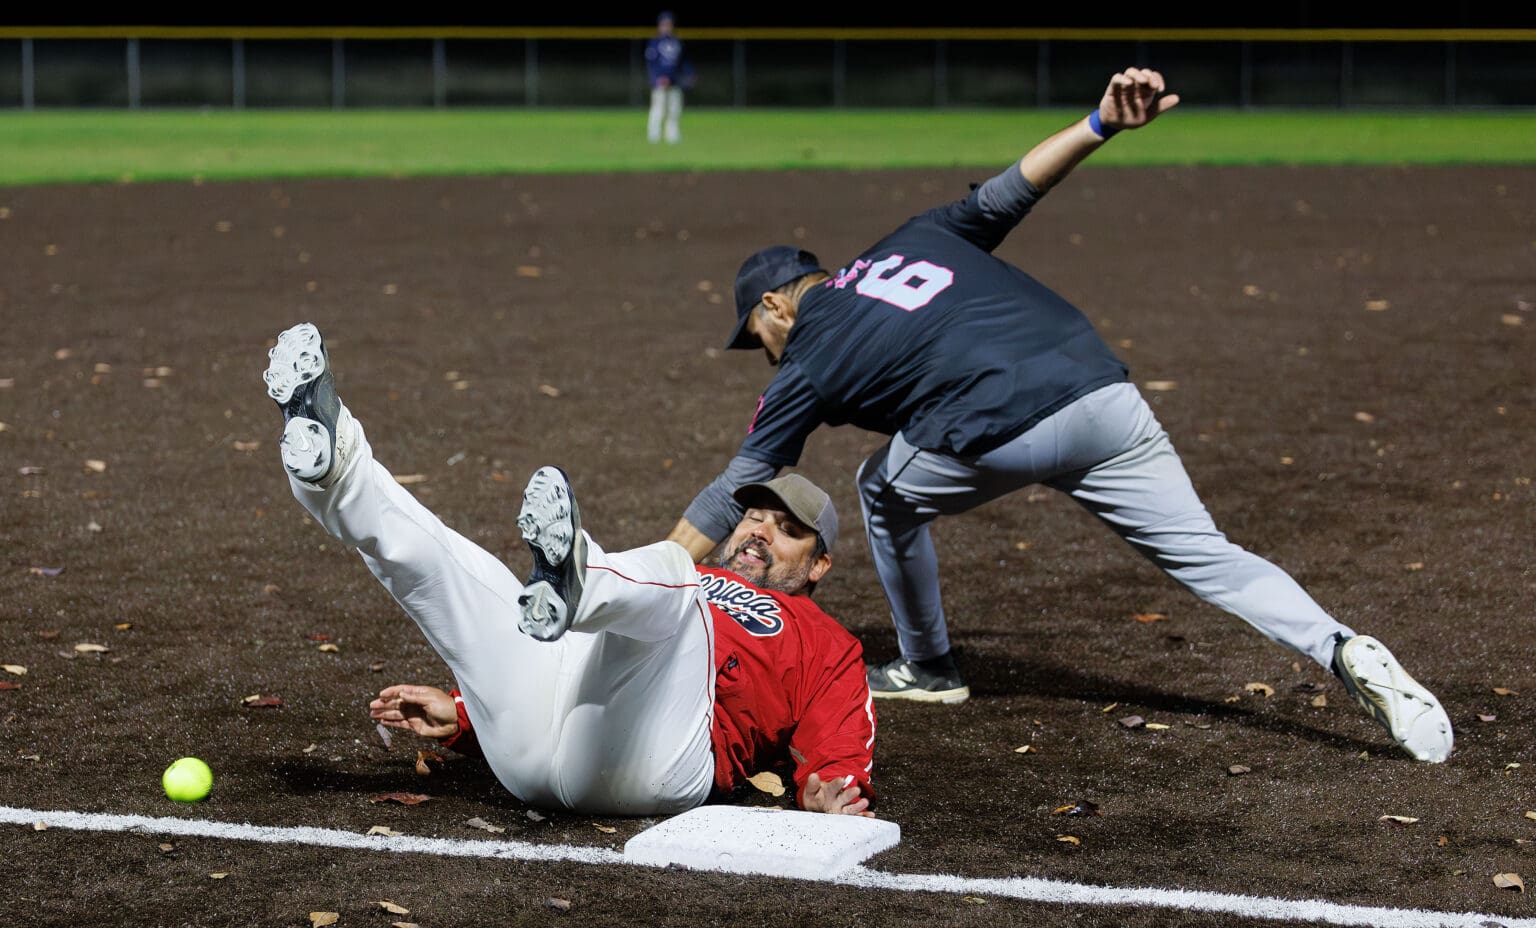 Romer Vivas slides against the dirt with his back to the ground as Jake Ruiz tries to catch the ball.